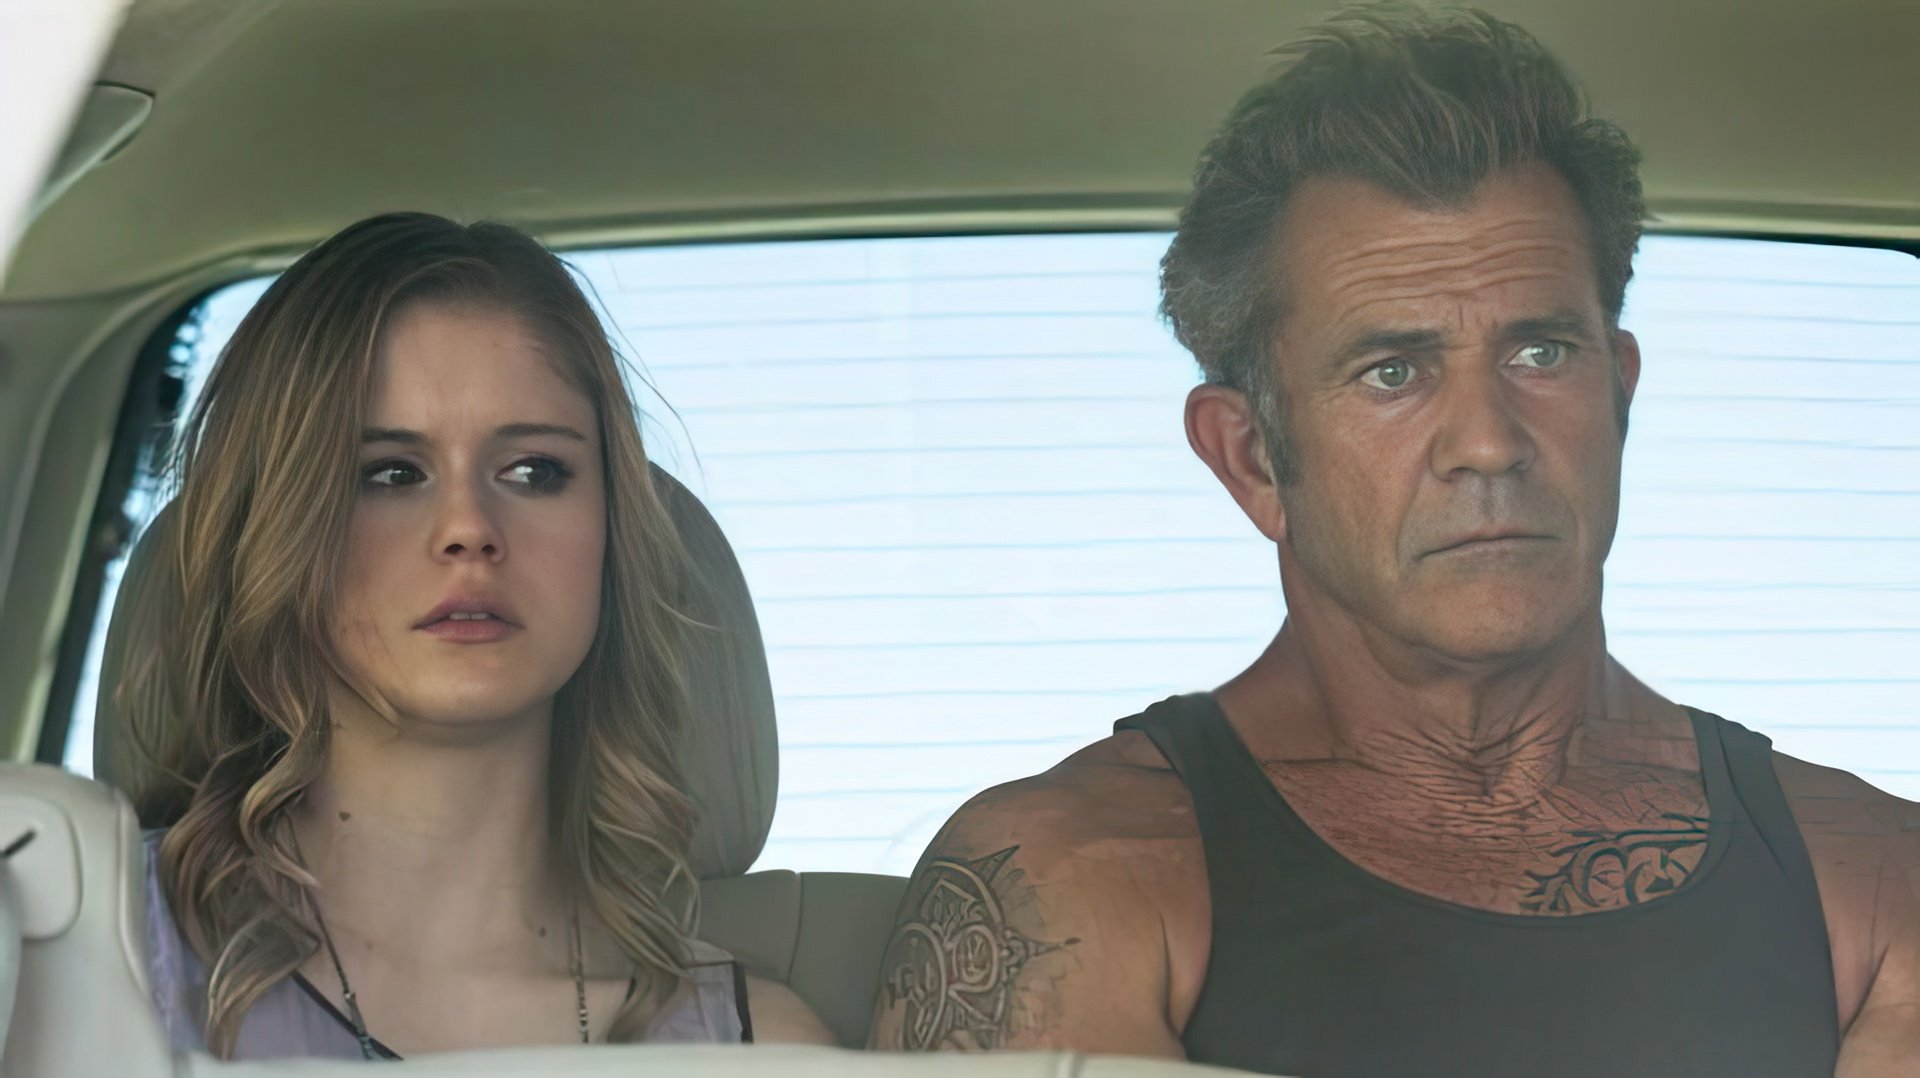 A Frame from Blood Father